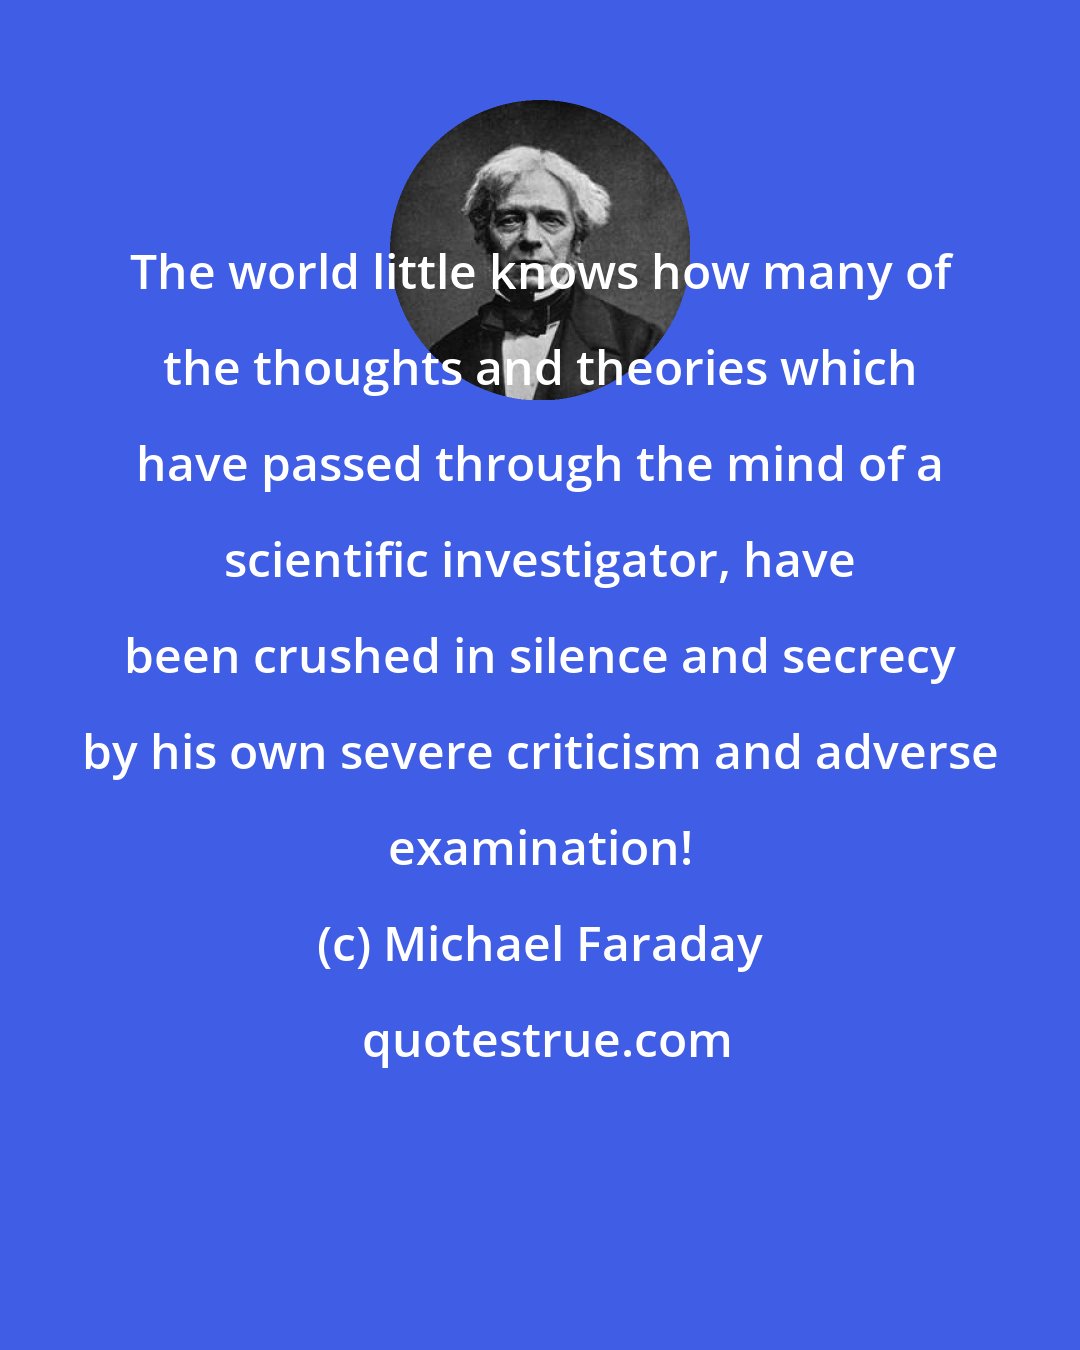 Michael Faraday: The world little knows how many of the thoughts and theories which have passed through the mind of a scientific investigator, have been crushed in silence and secrecy by his own severe criticism and adverse examination!